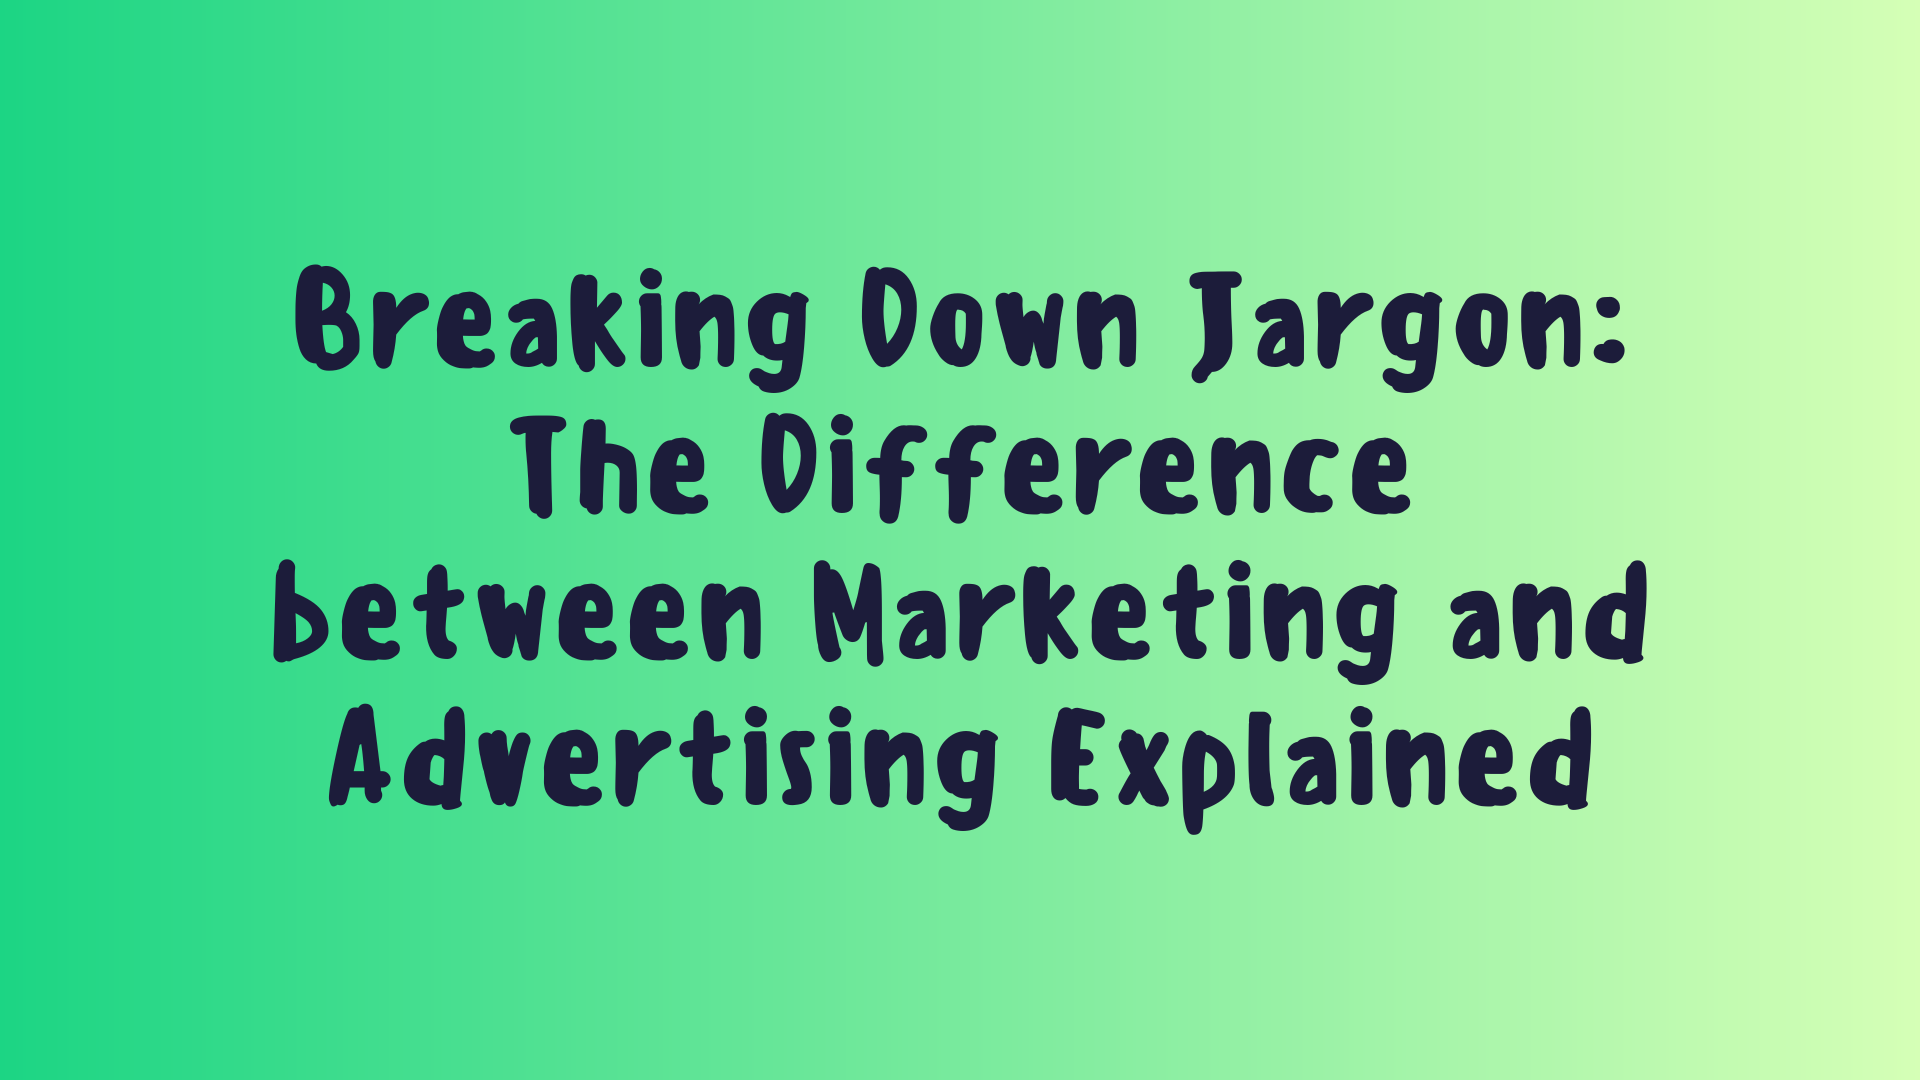 The Difference between Marketing and Advertising Explained